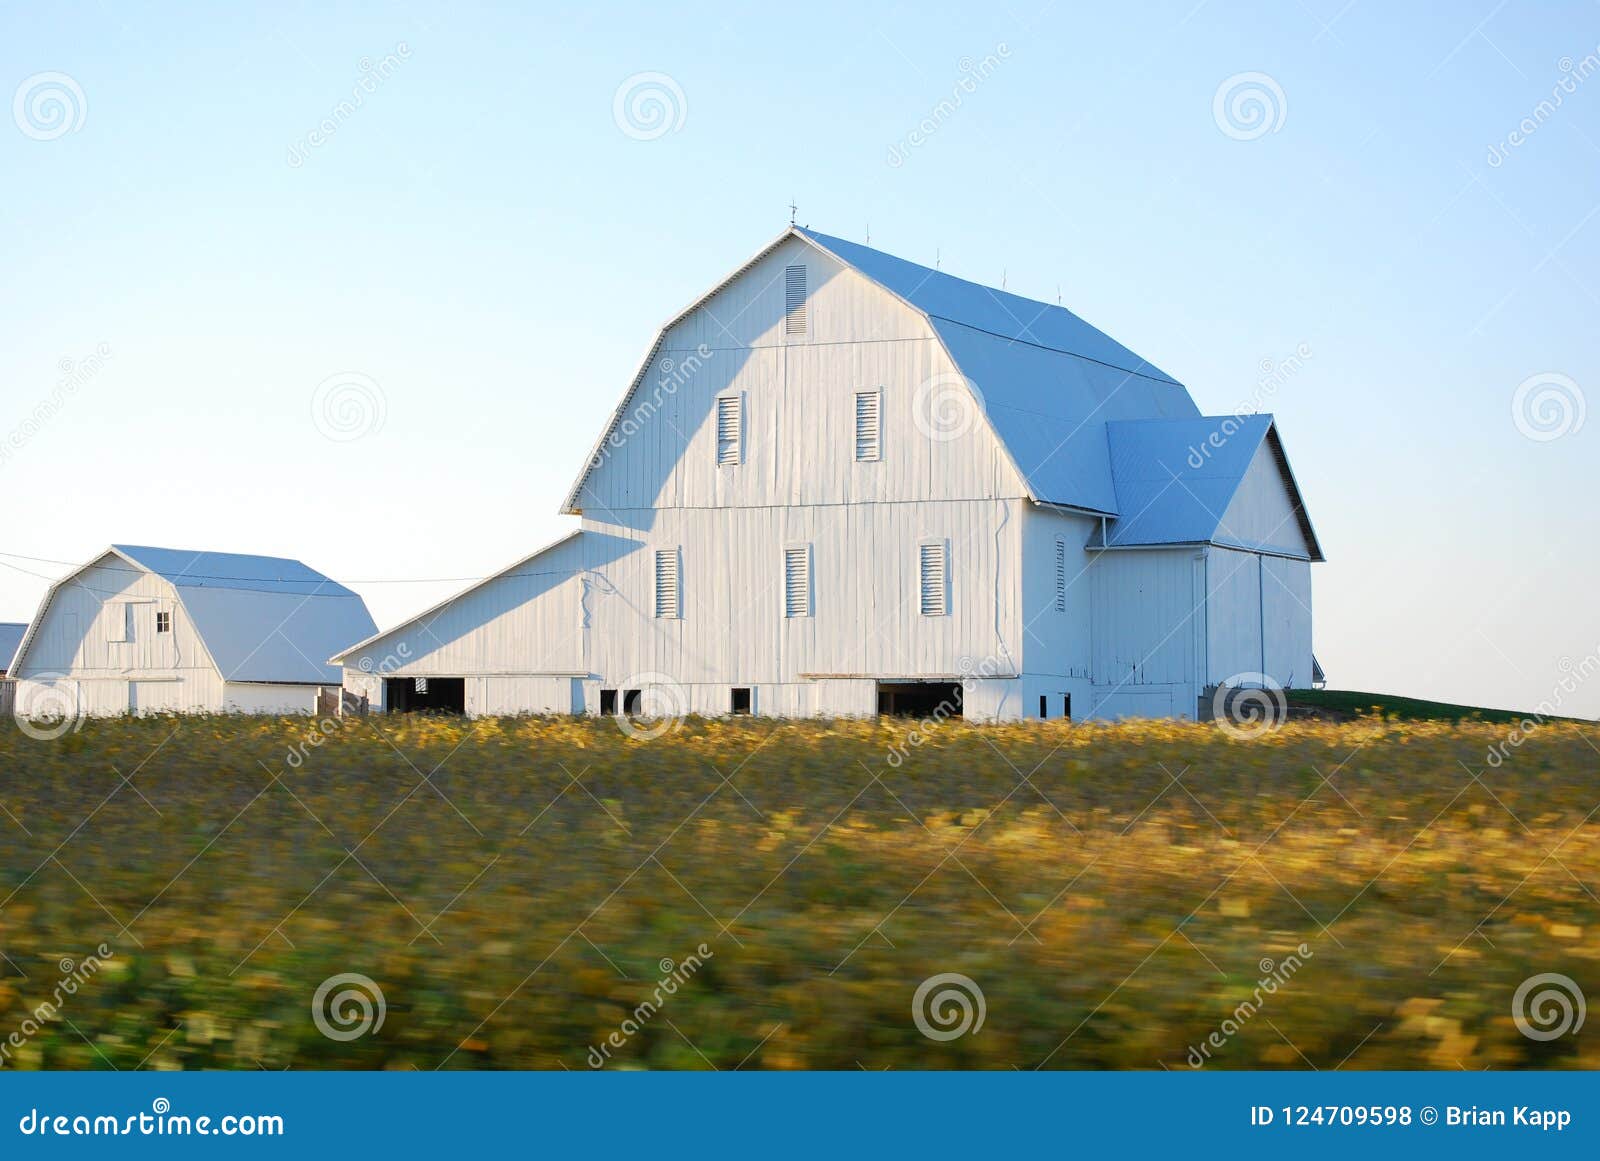 White Barns At Dusk In The Midwest